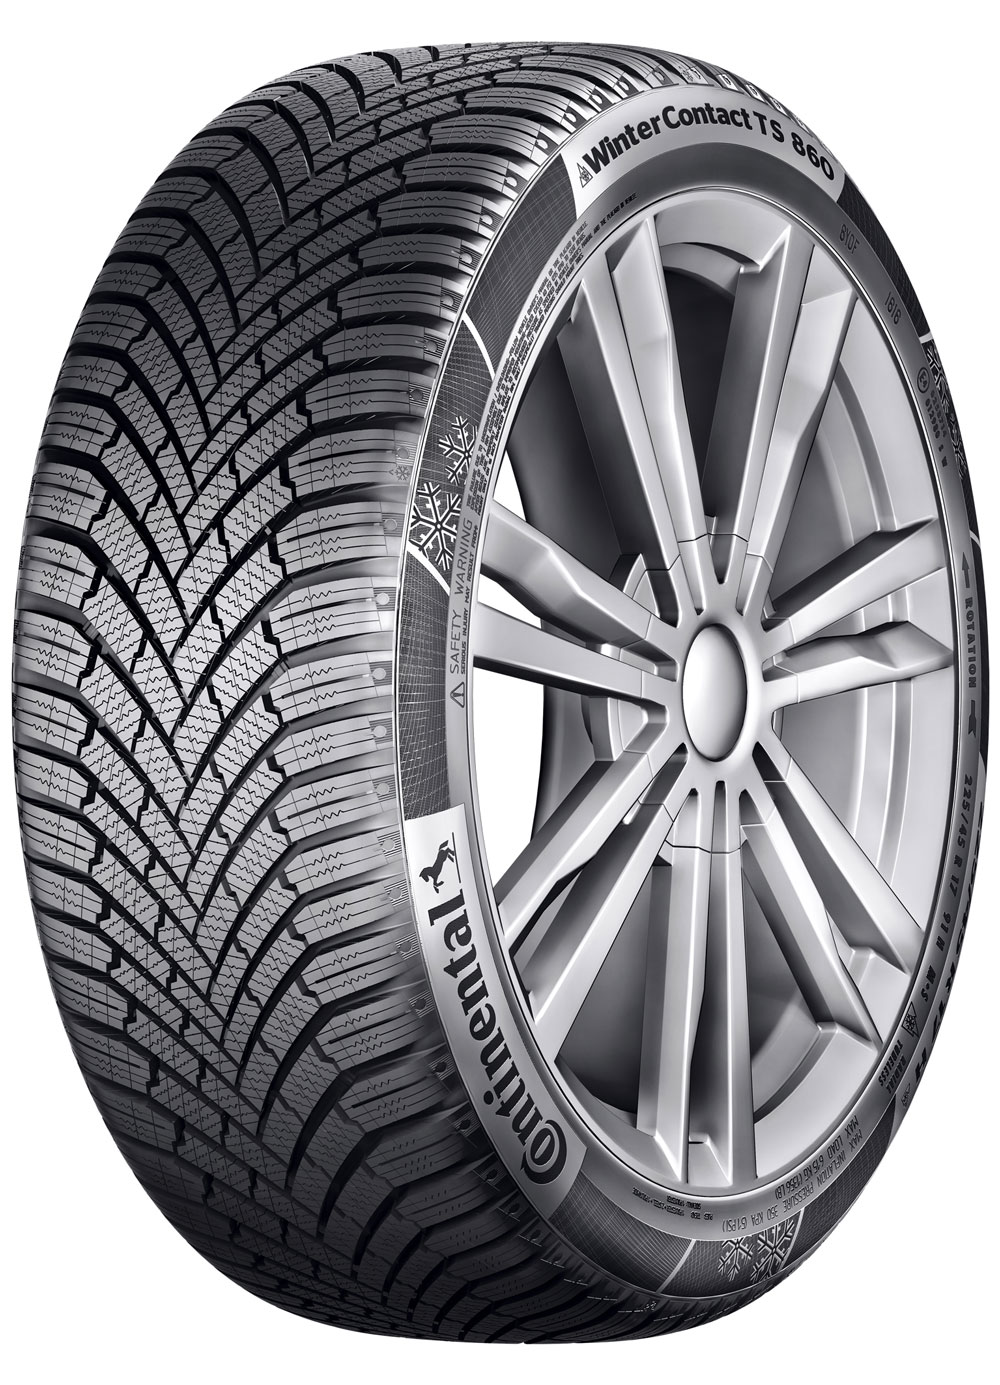 Anvelopa Iarna Continental Winter Contact Ts860 155/70R13 75T